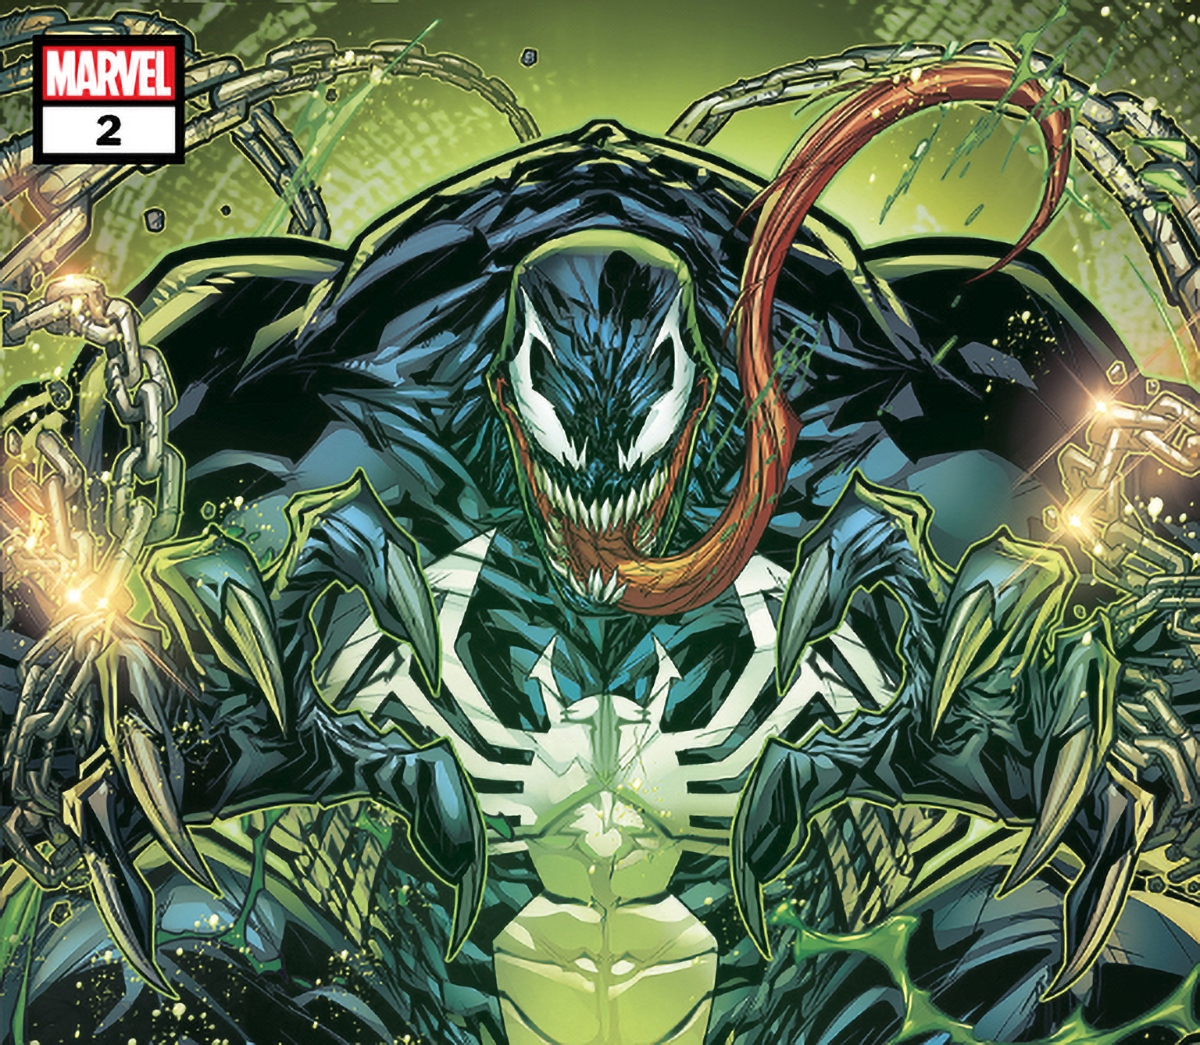 Marvel to celebrate Local Comic Shop Day with 'Venom' #2 variant cover